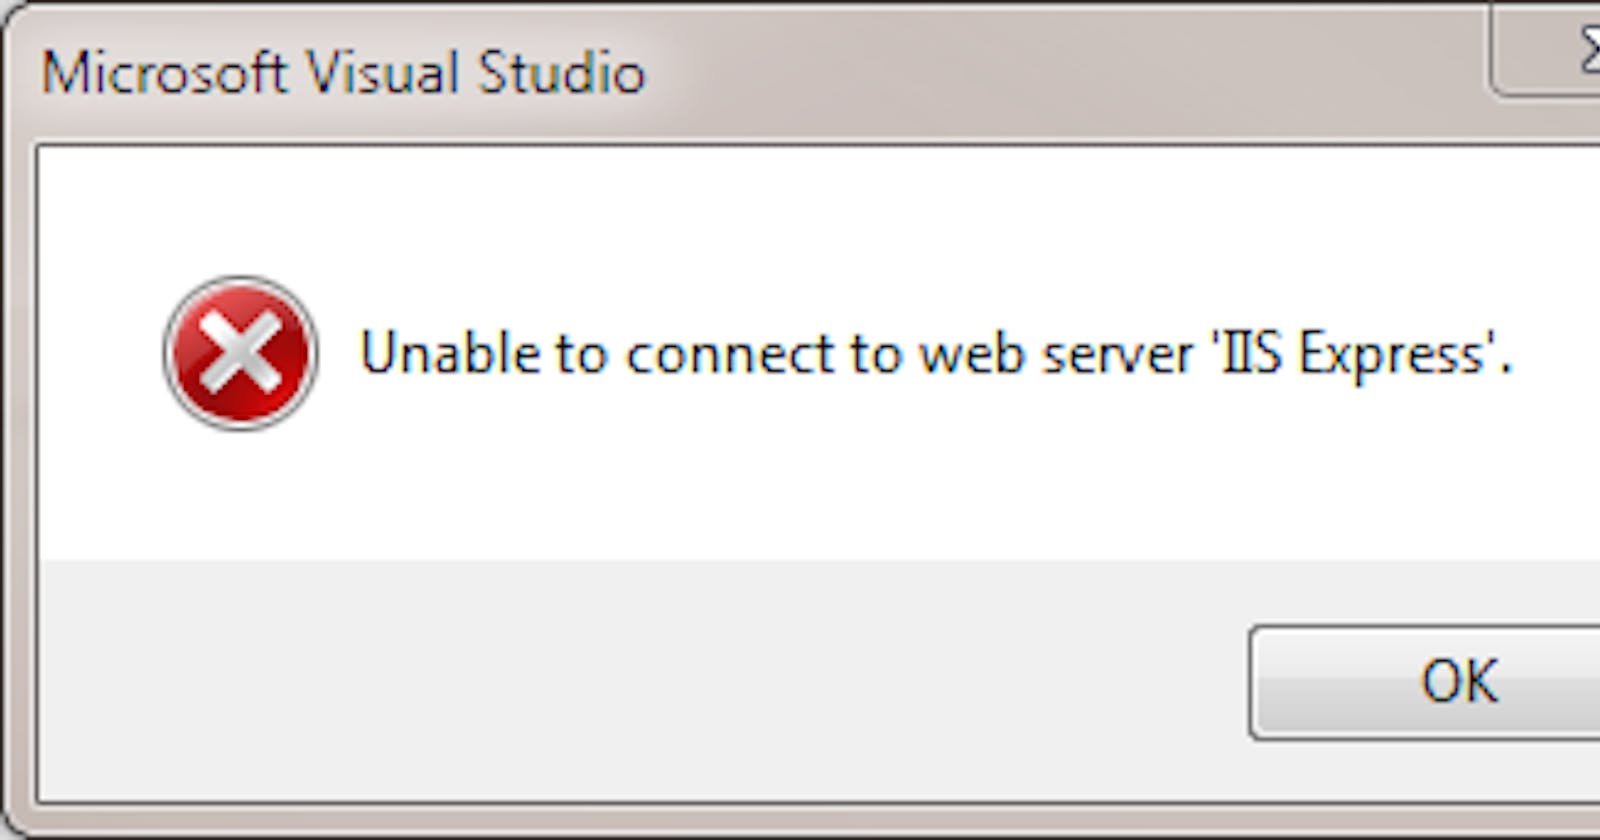 Peculiar case of “Unable to connect to web server ‘IIS Express'”